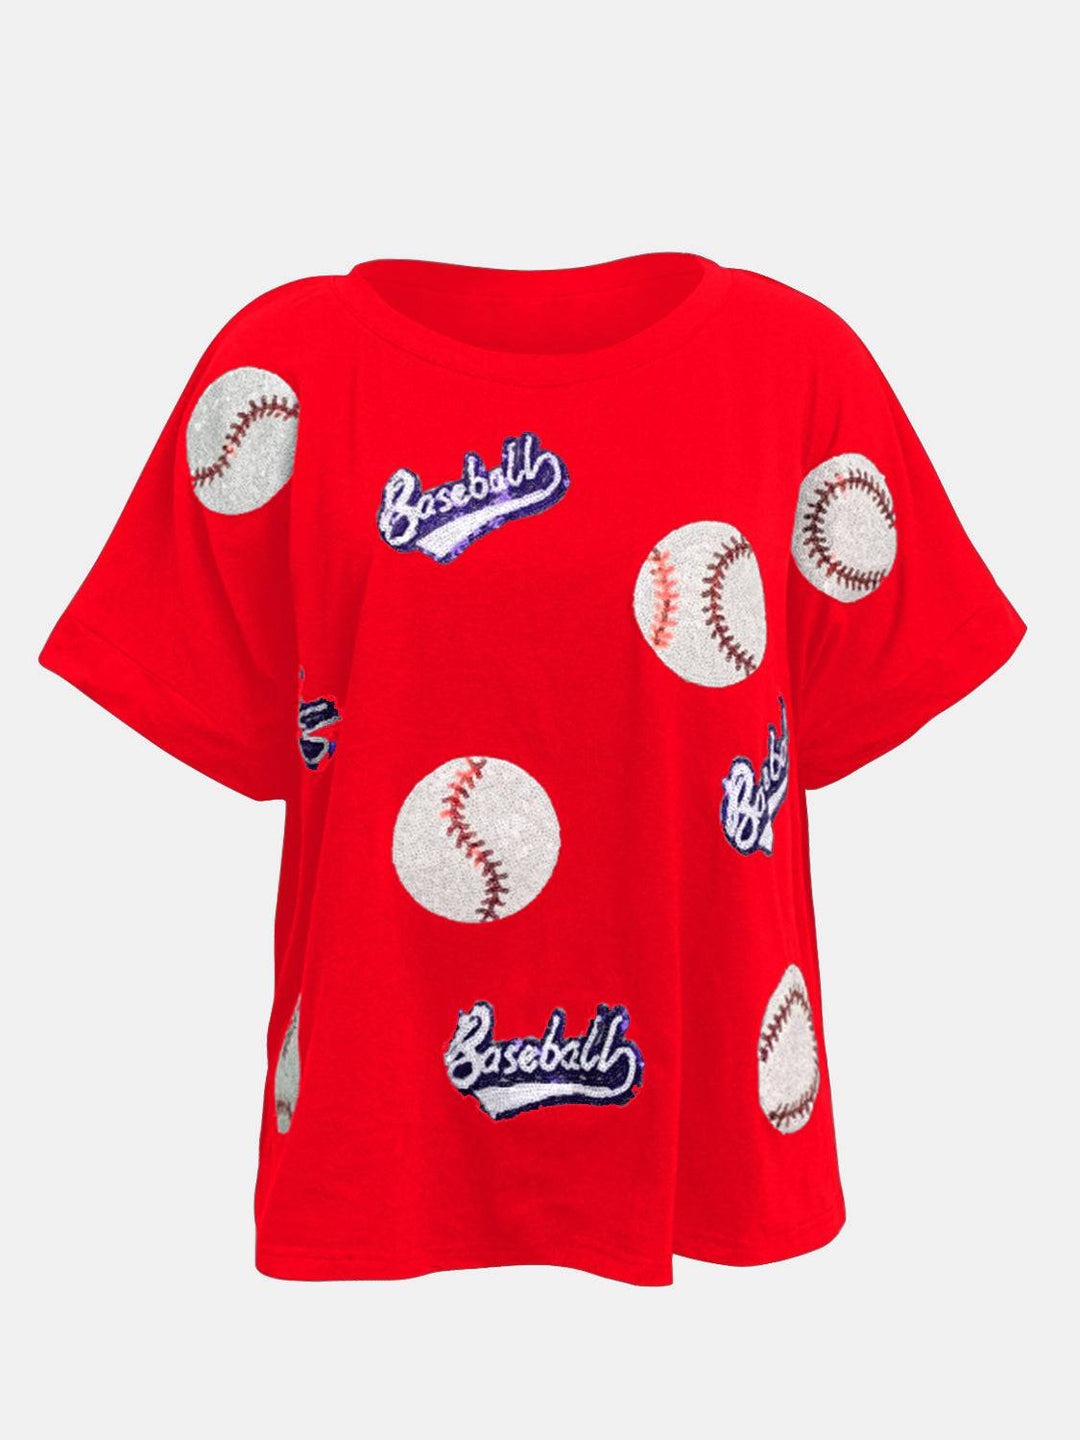 a red shirt with baseballs on it